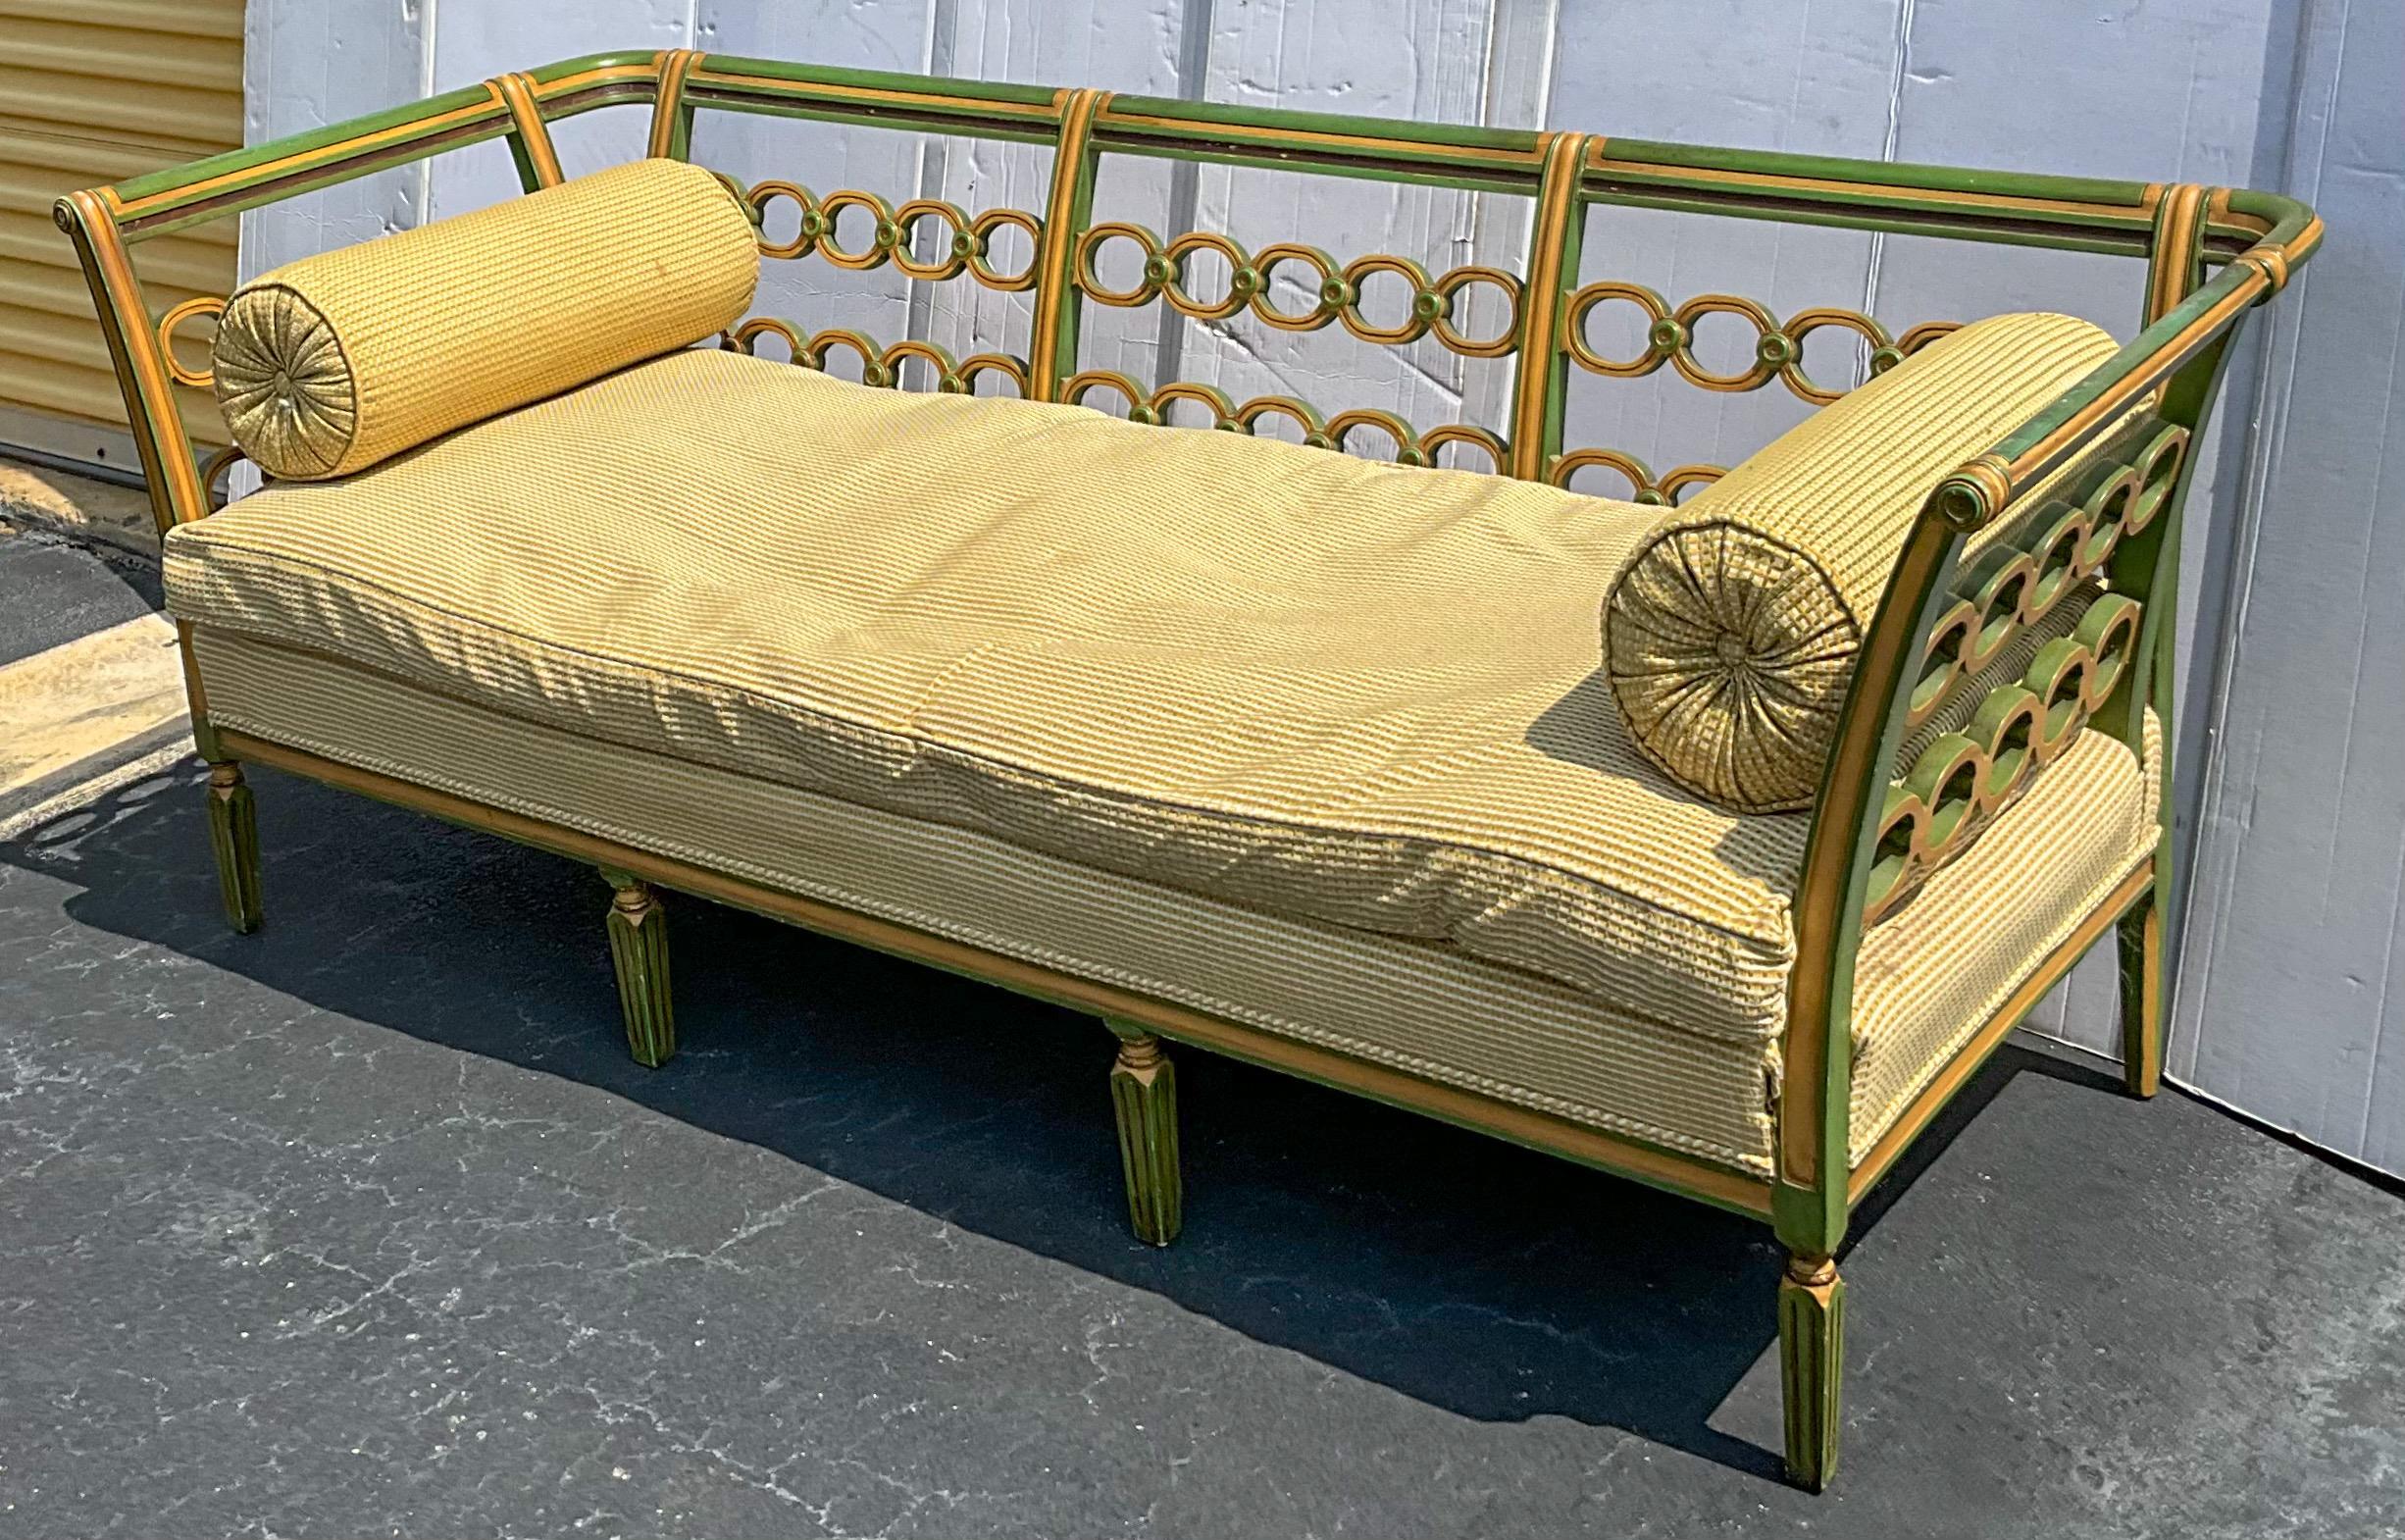 20th Century Early 20th- C Regency Style Carved and Hand Painted Sofa / Settee Down Cushion For Sale